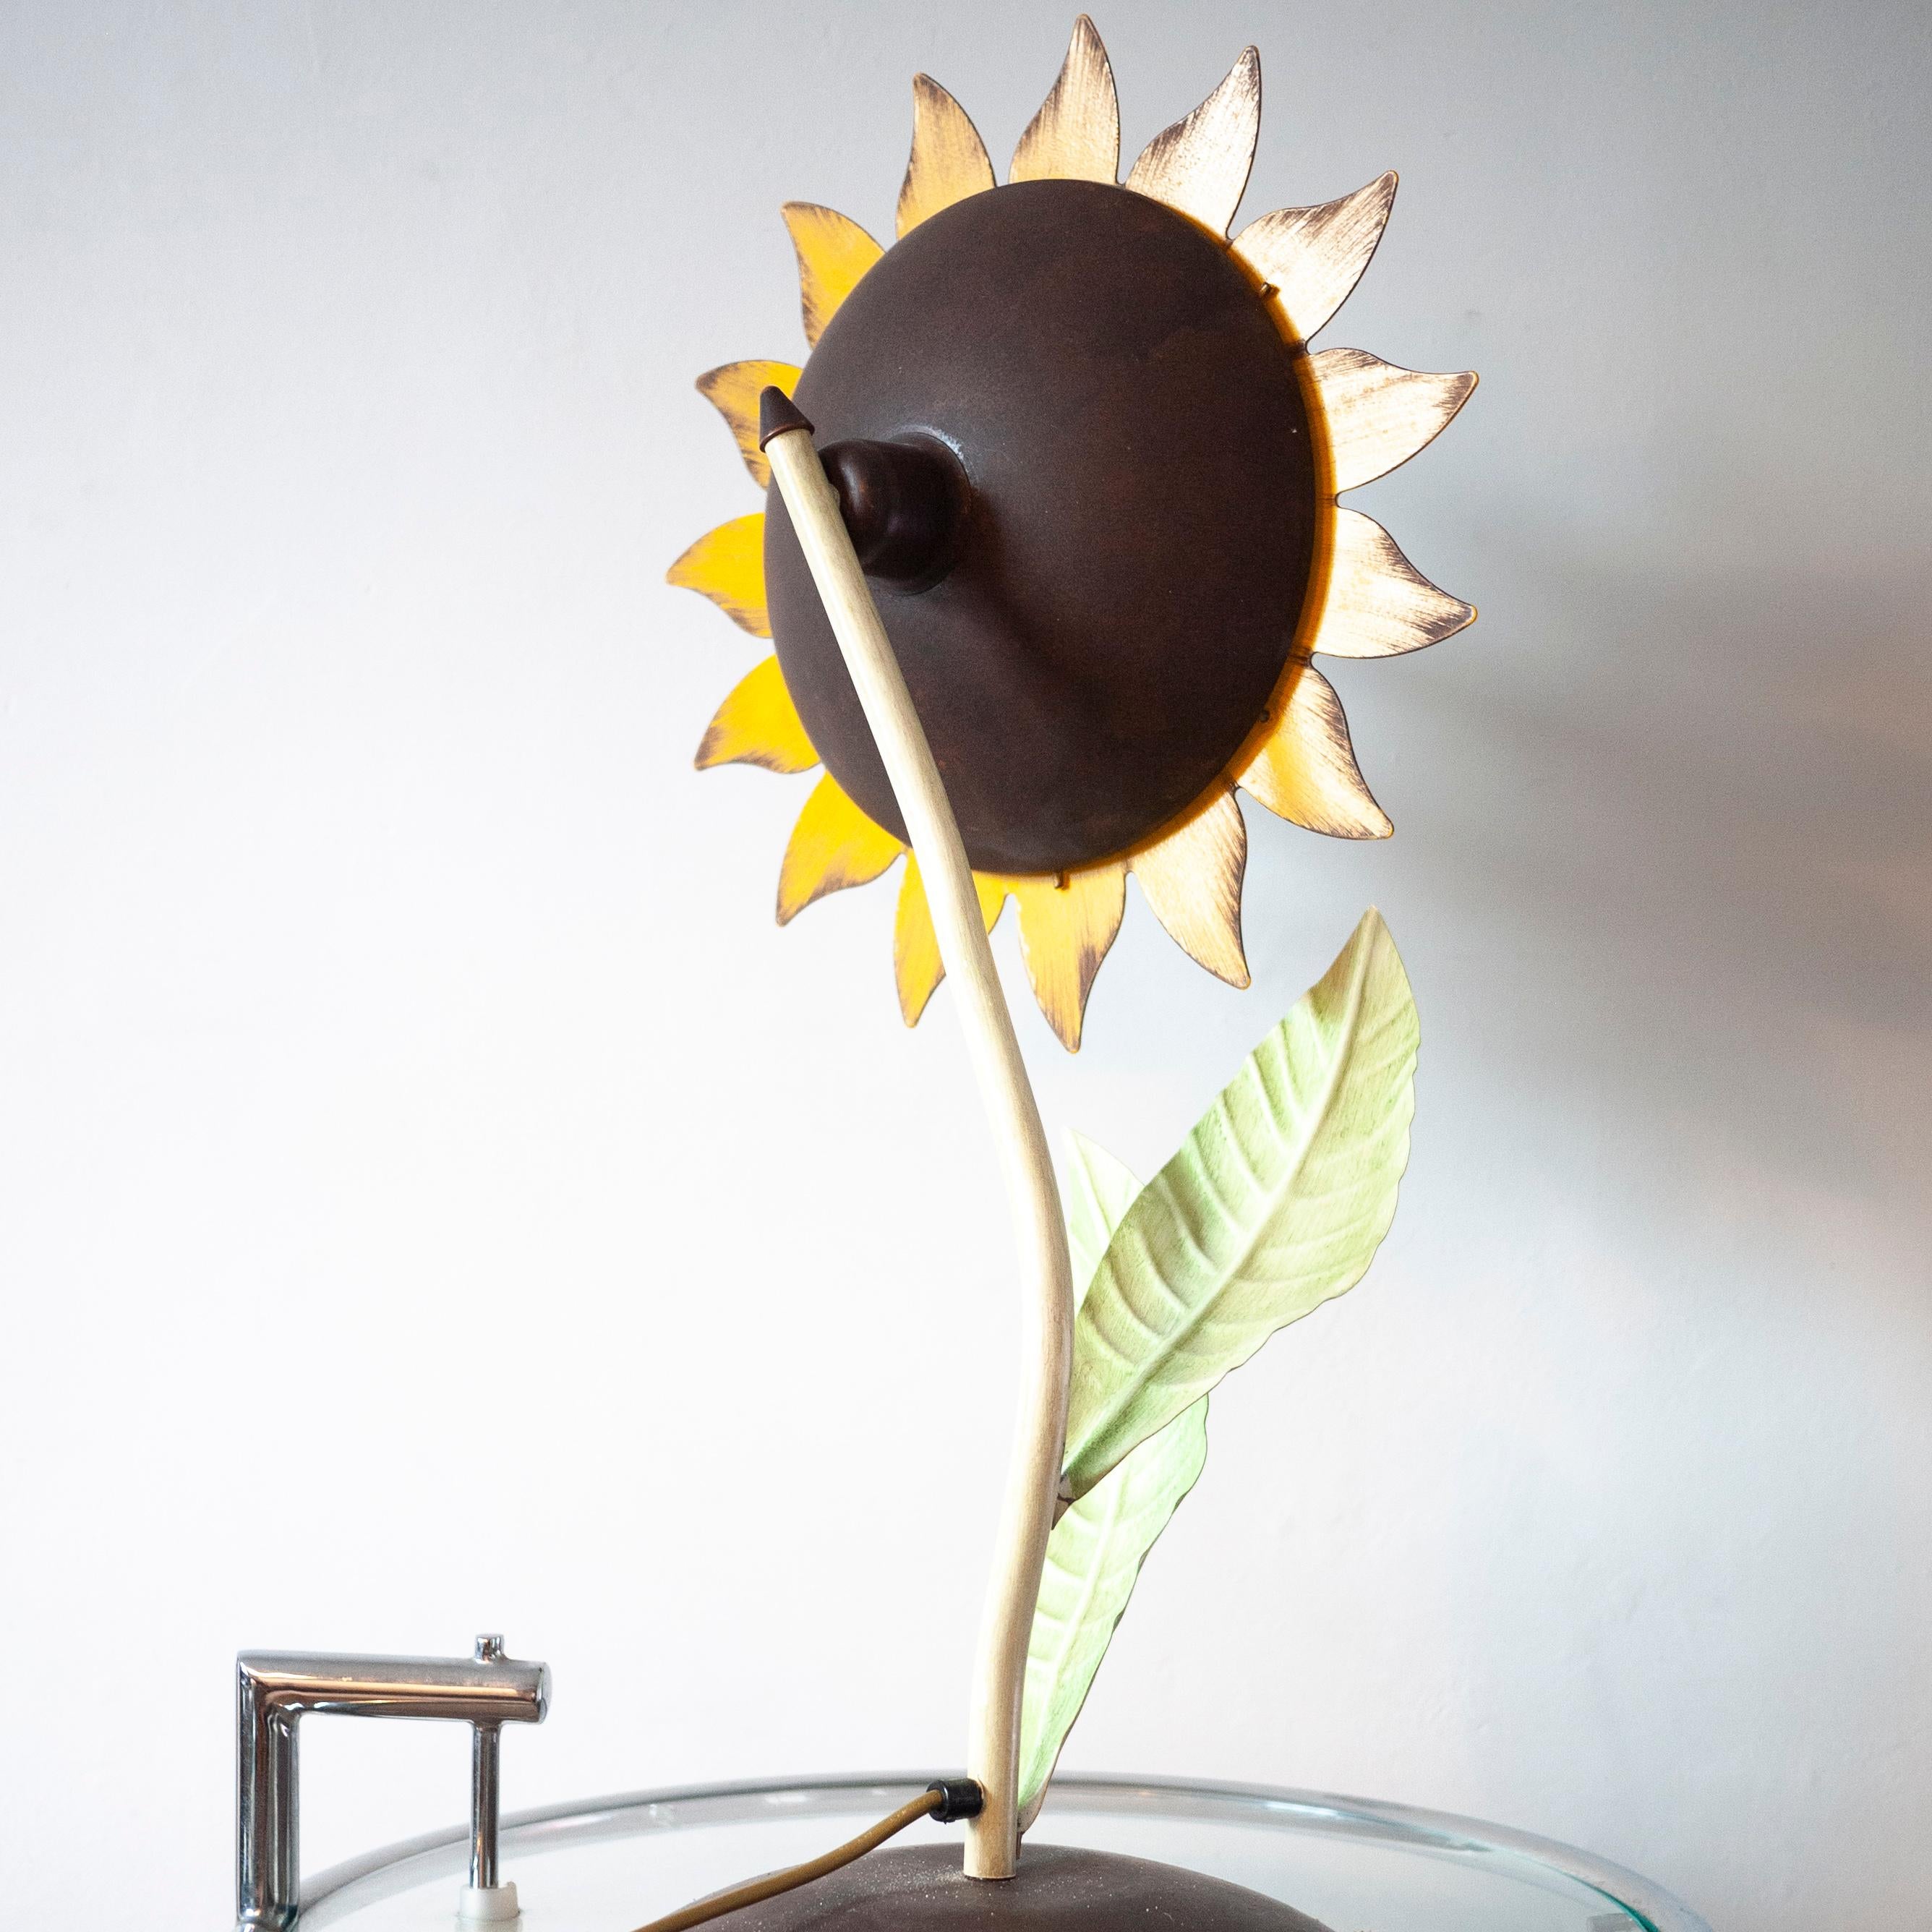 Decorative Midcentury Italian Metal Painted Sunflower Table Lamp, 1970s For Sale 5